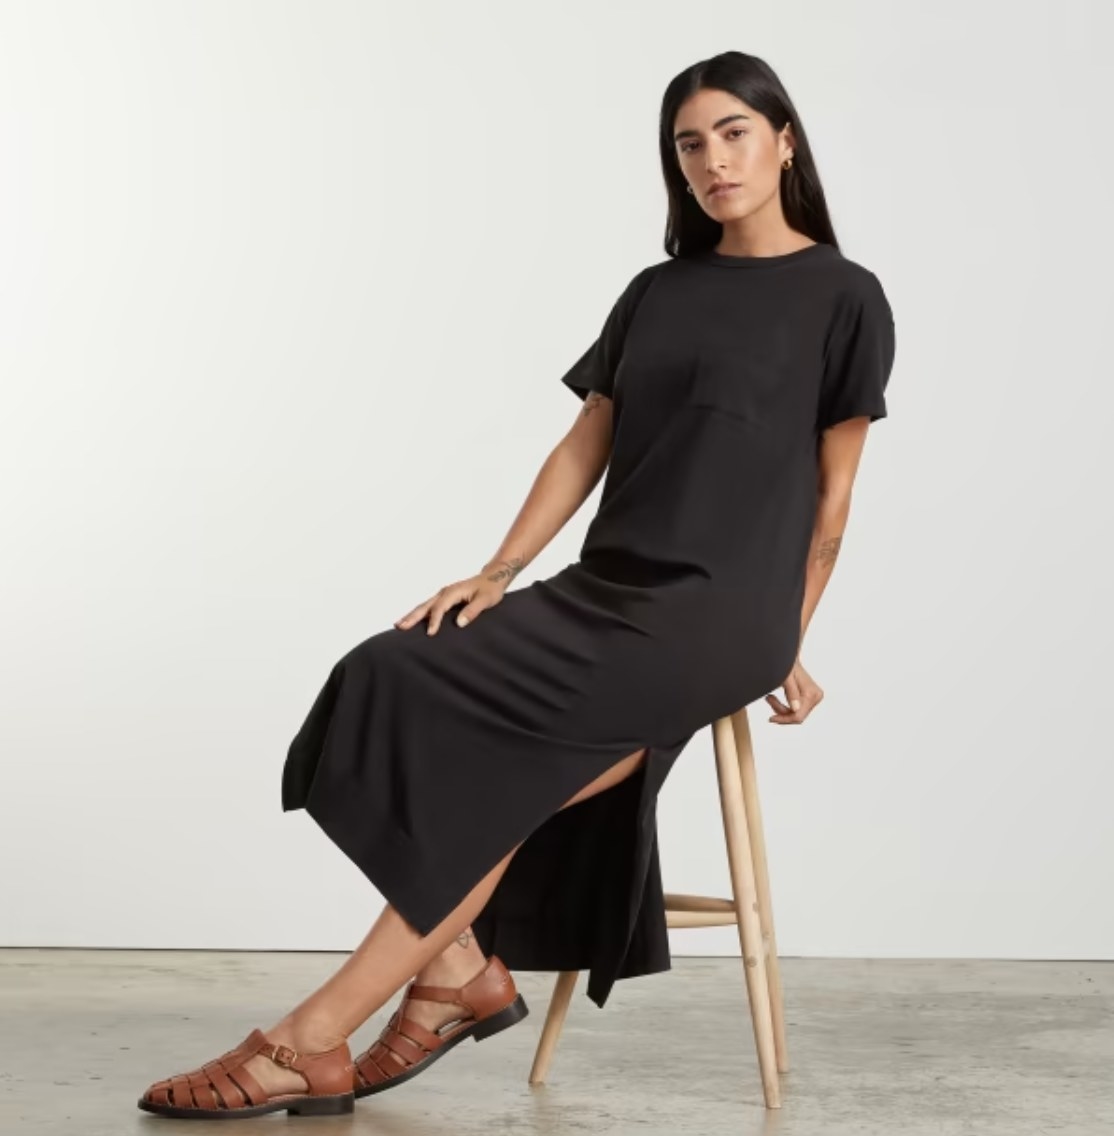 A model wearing a black dress with brown shoes